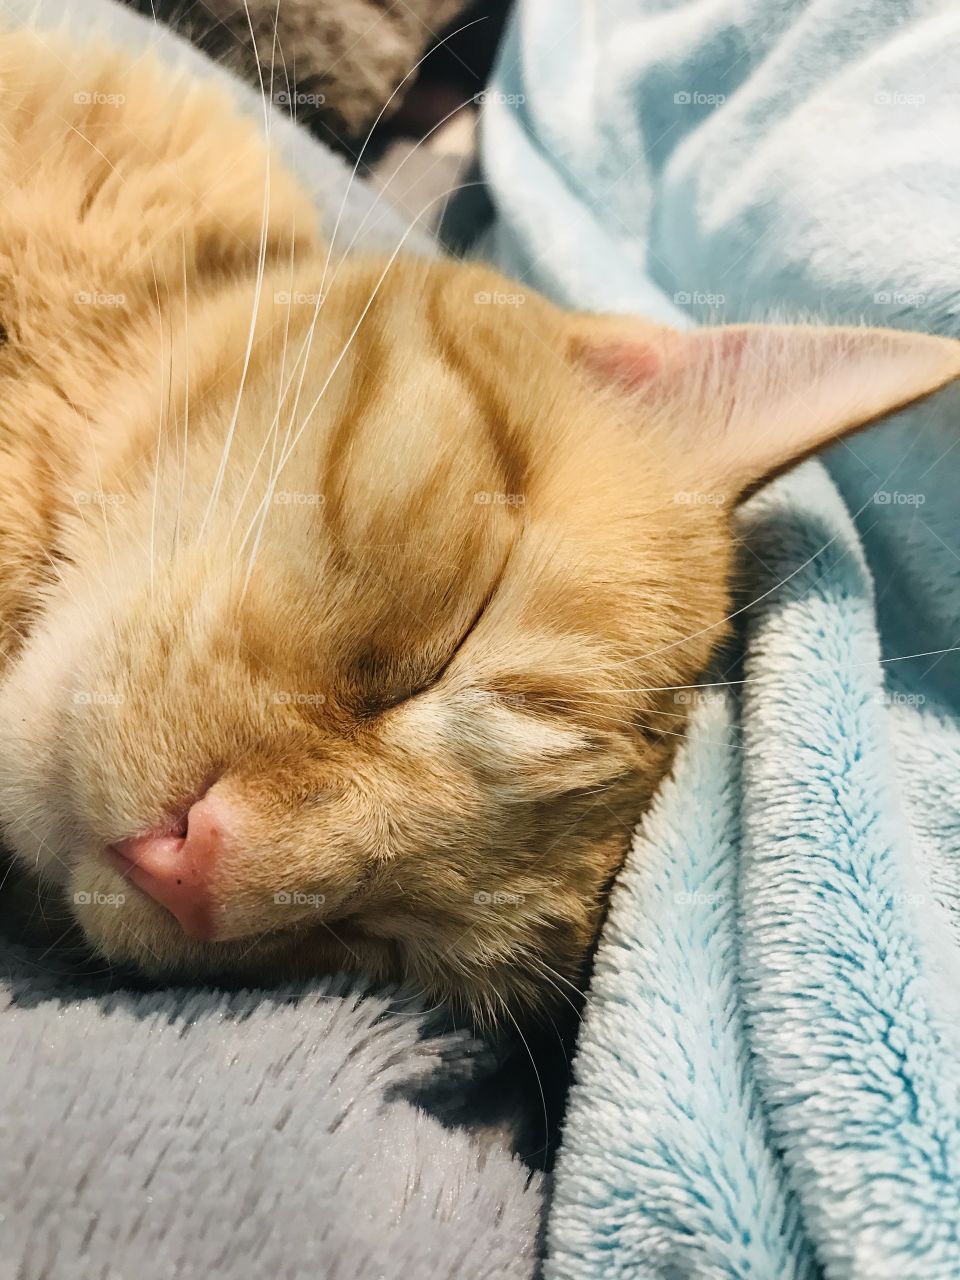 Darling orange tabby kitty cat all cuddled up in cozy blankets on bed! 